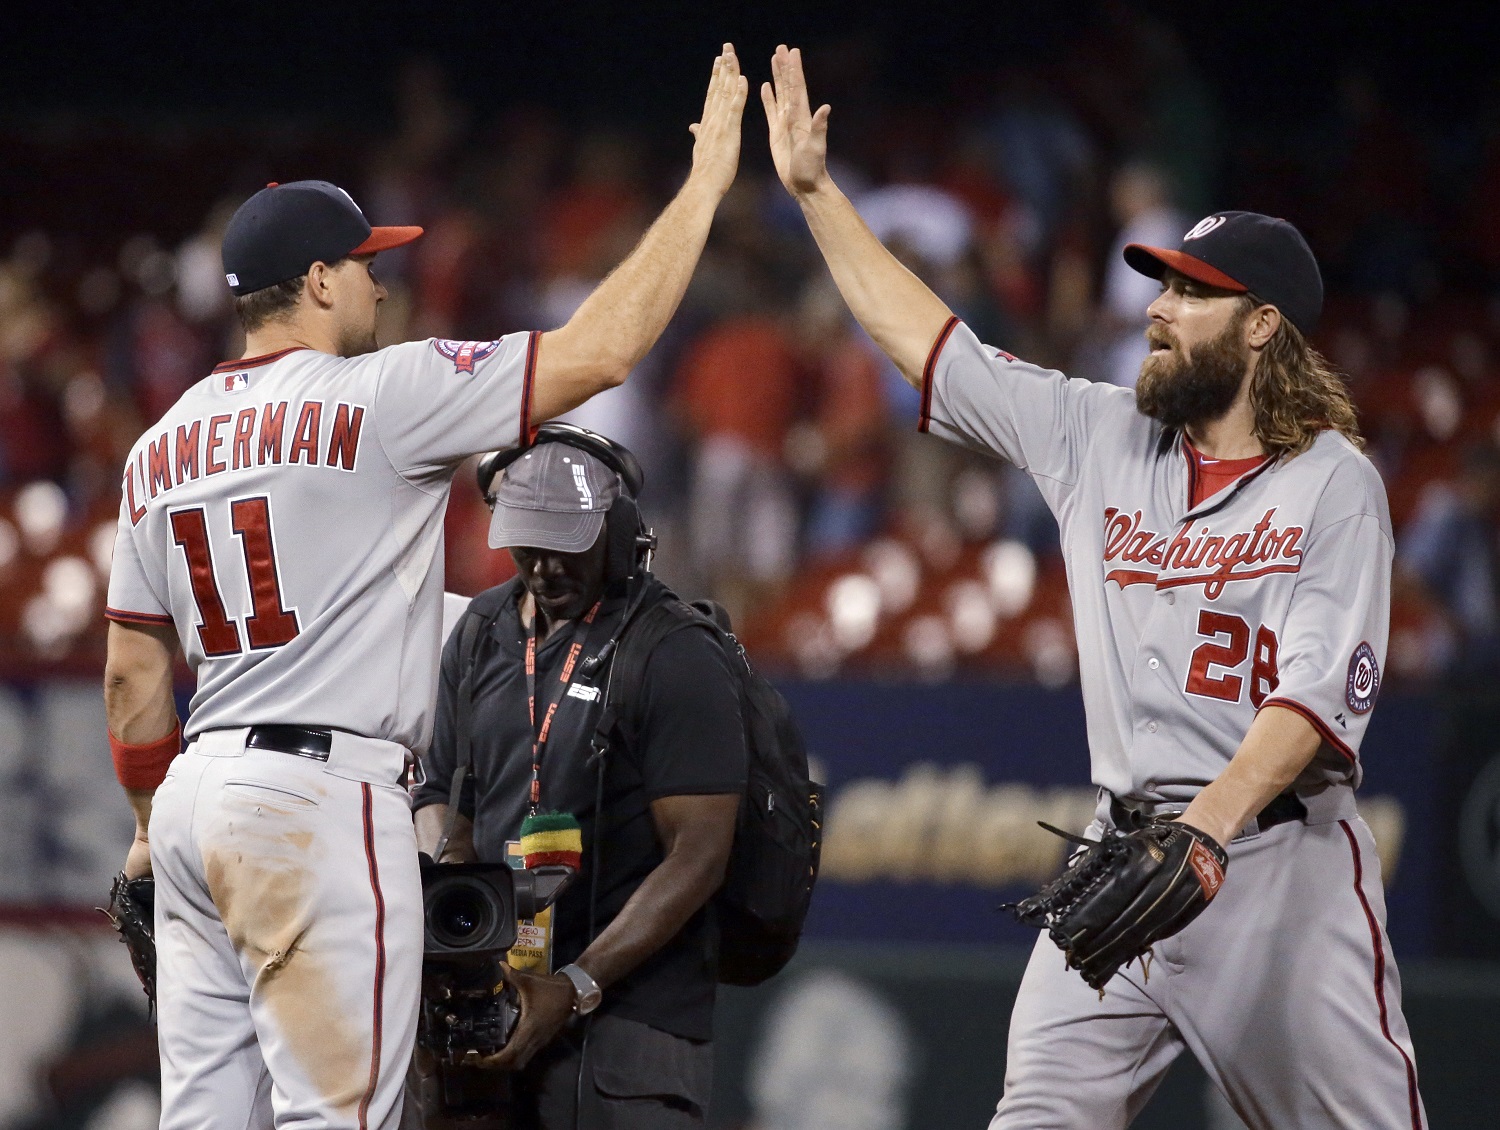 Washington Nationals' Ryan Zimmerman, left, and Jayson Werth celebrate following the Nationals' 4-3 victory over the St. Louis Cardinals in a baseball game Wednesday, Sept. 2, 2015, in St. Louis. (AP Photo/Jeff Roberson)